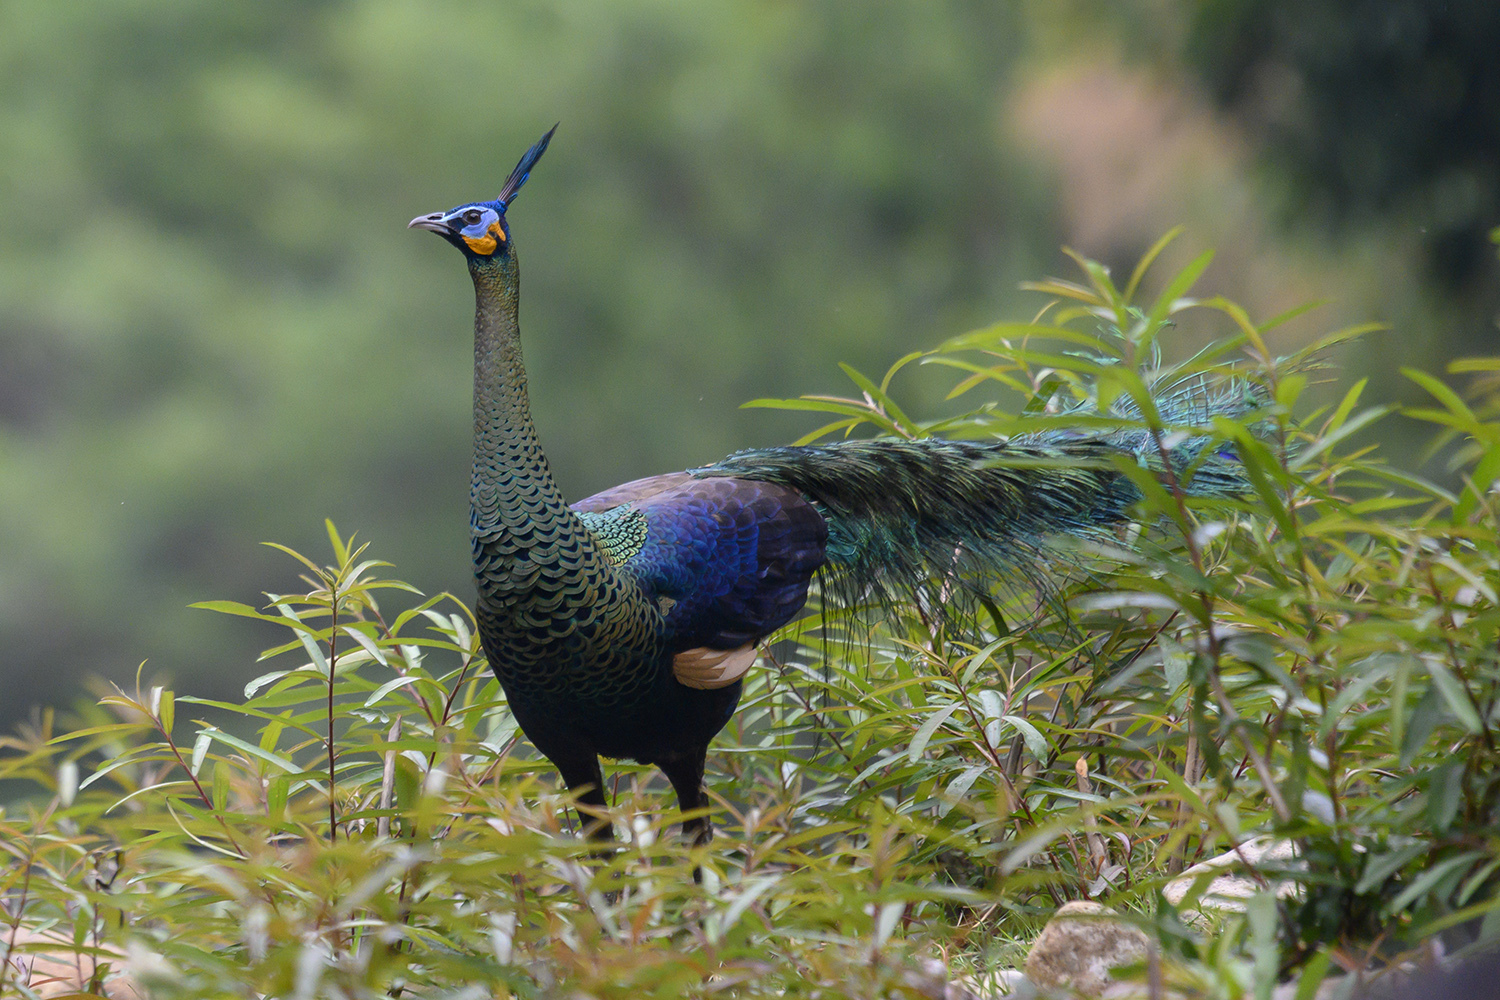 COP15 Update in Yunnan, China: The Population of Endangered Species, Green  Peafowl, Has Shown Steady Increase | Business Wire